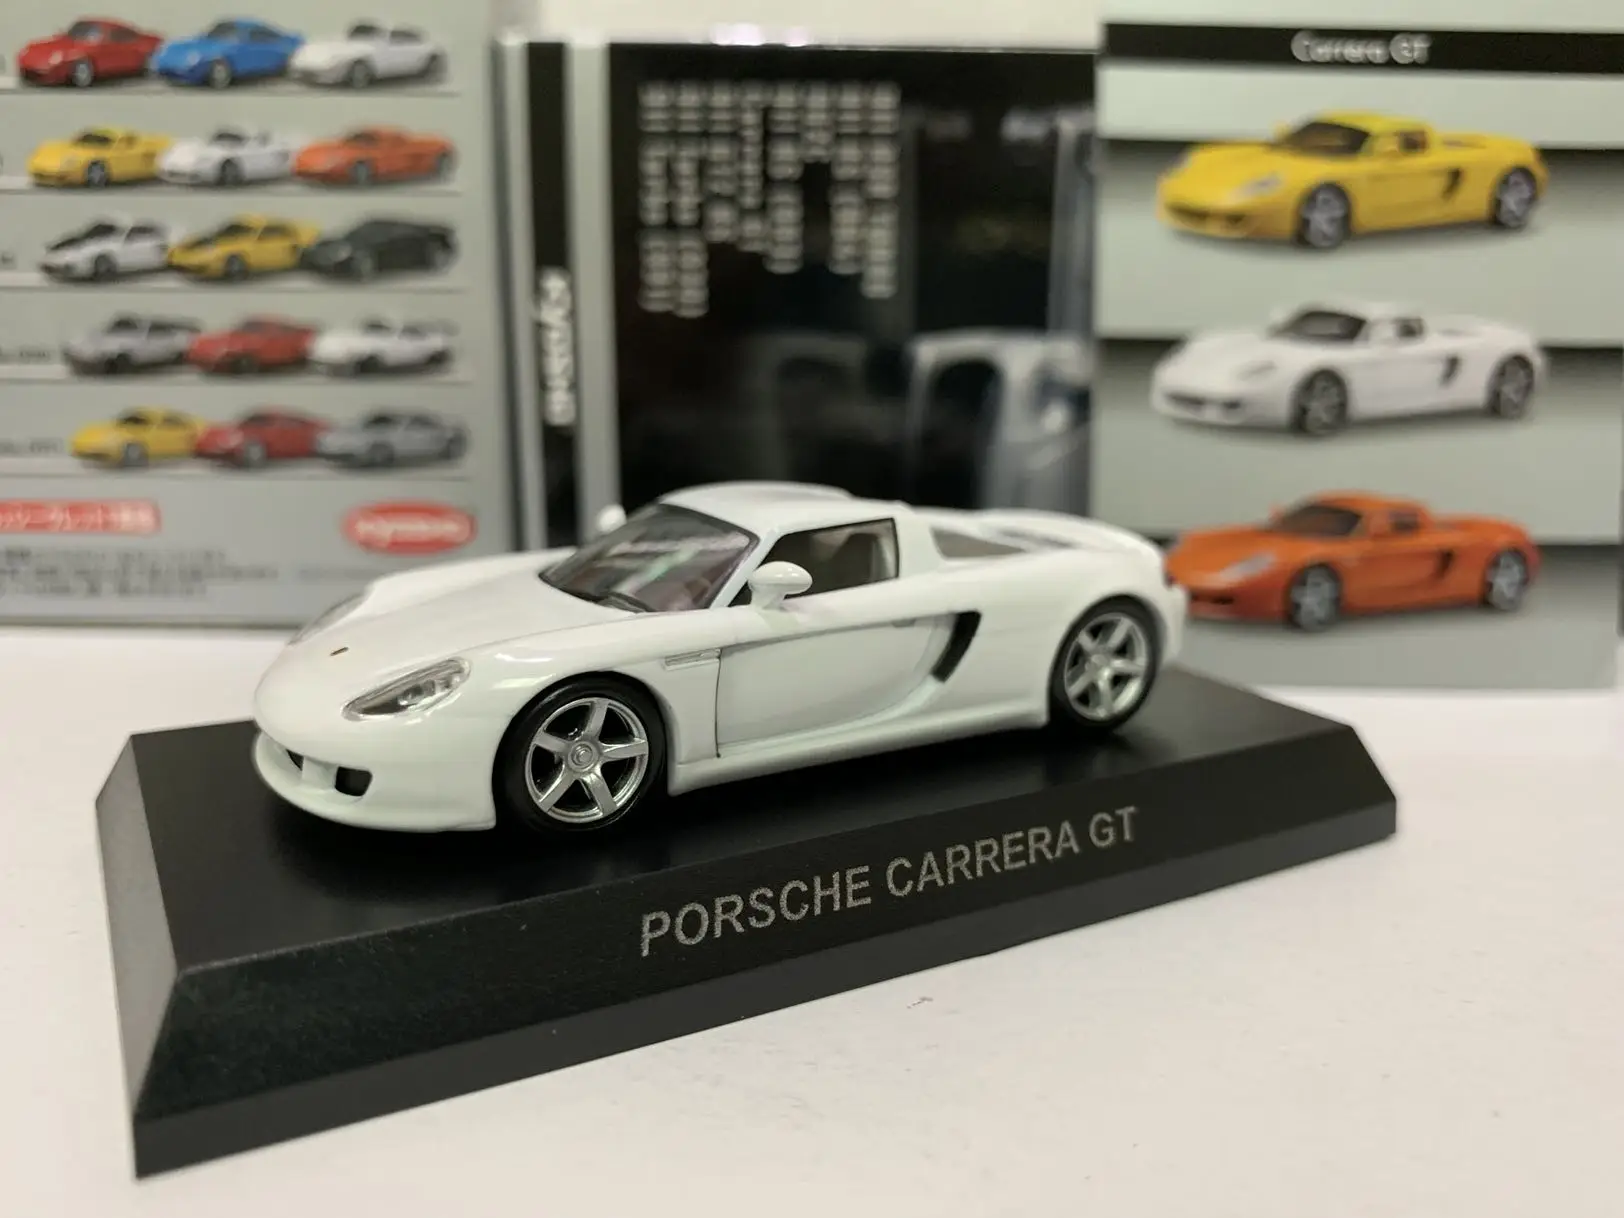 

KYOSHO 1/64 Porsche Carrera GT Collect die casting alloy trolley model